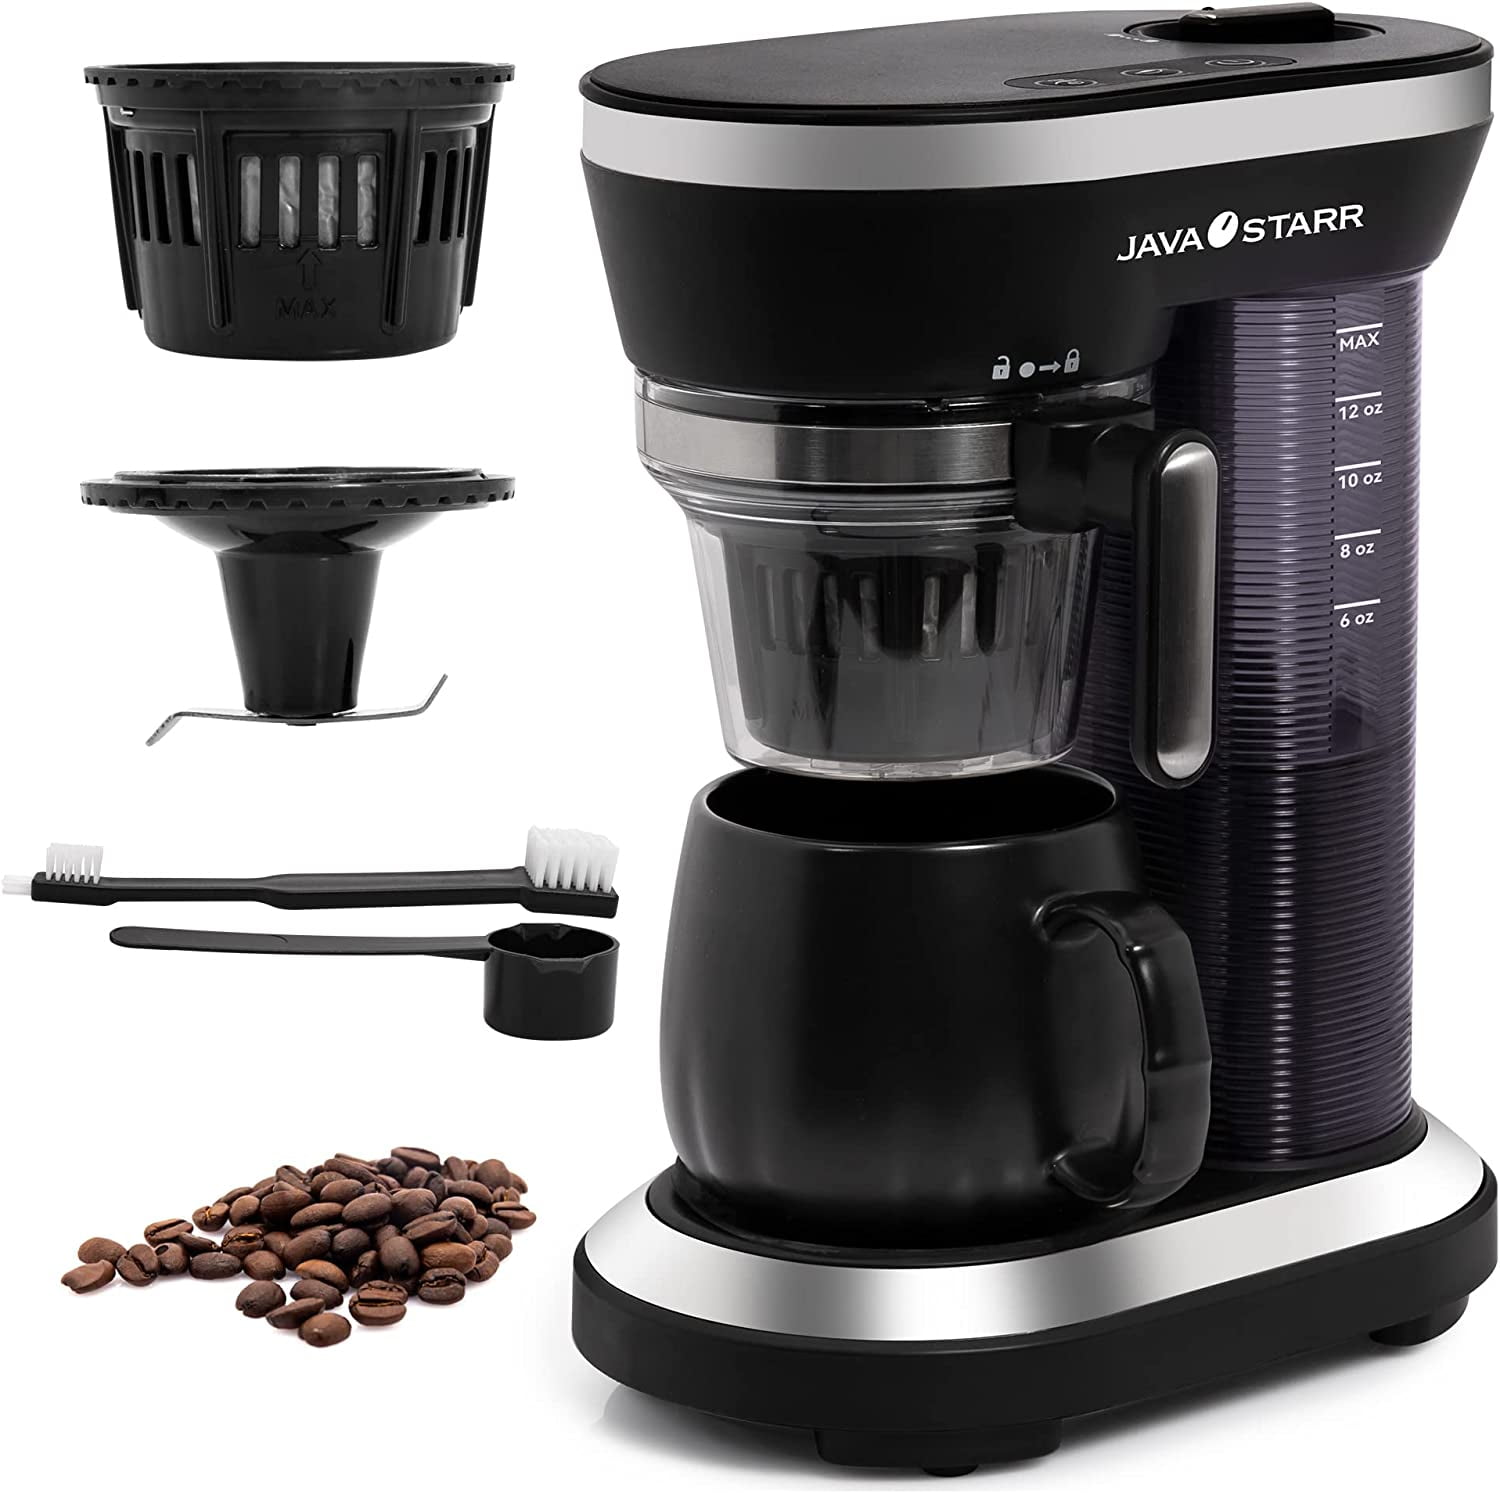 Should I buy a bean to cup coffee machine?